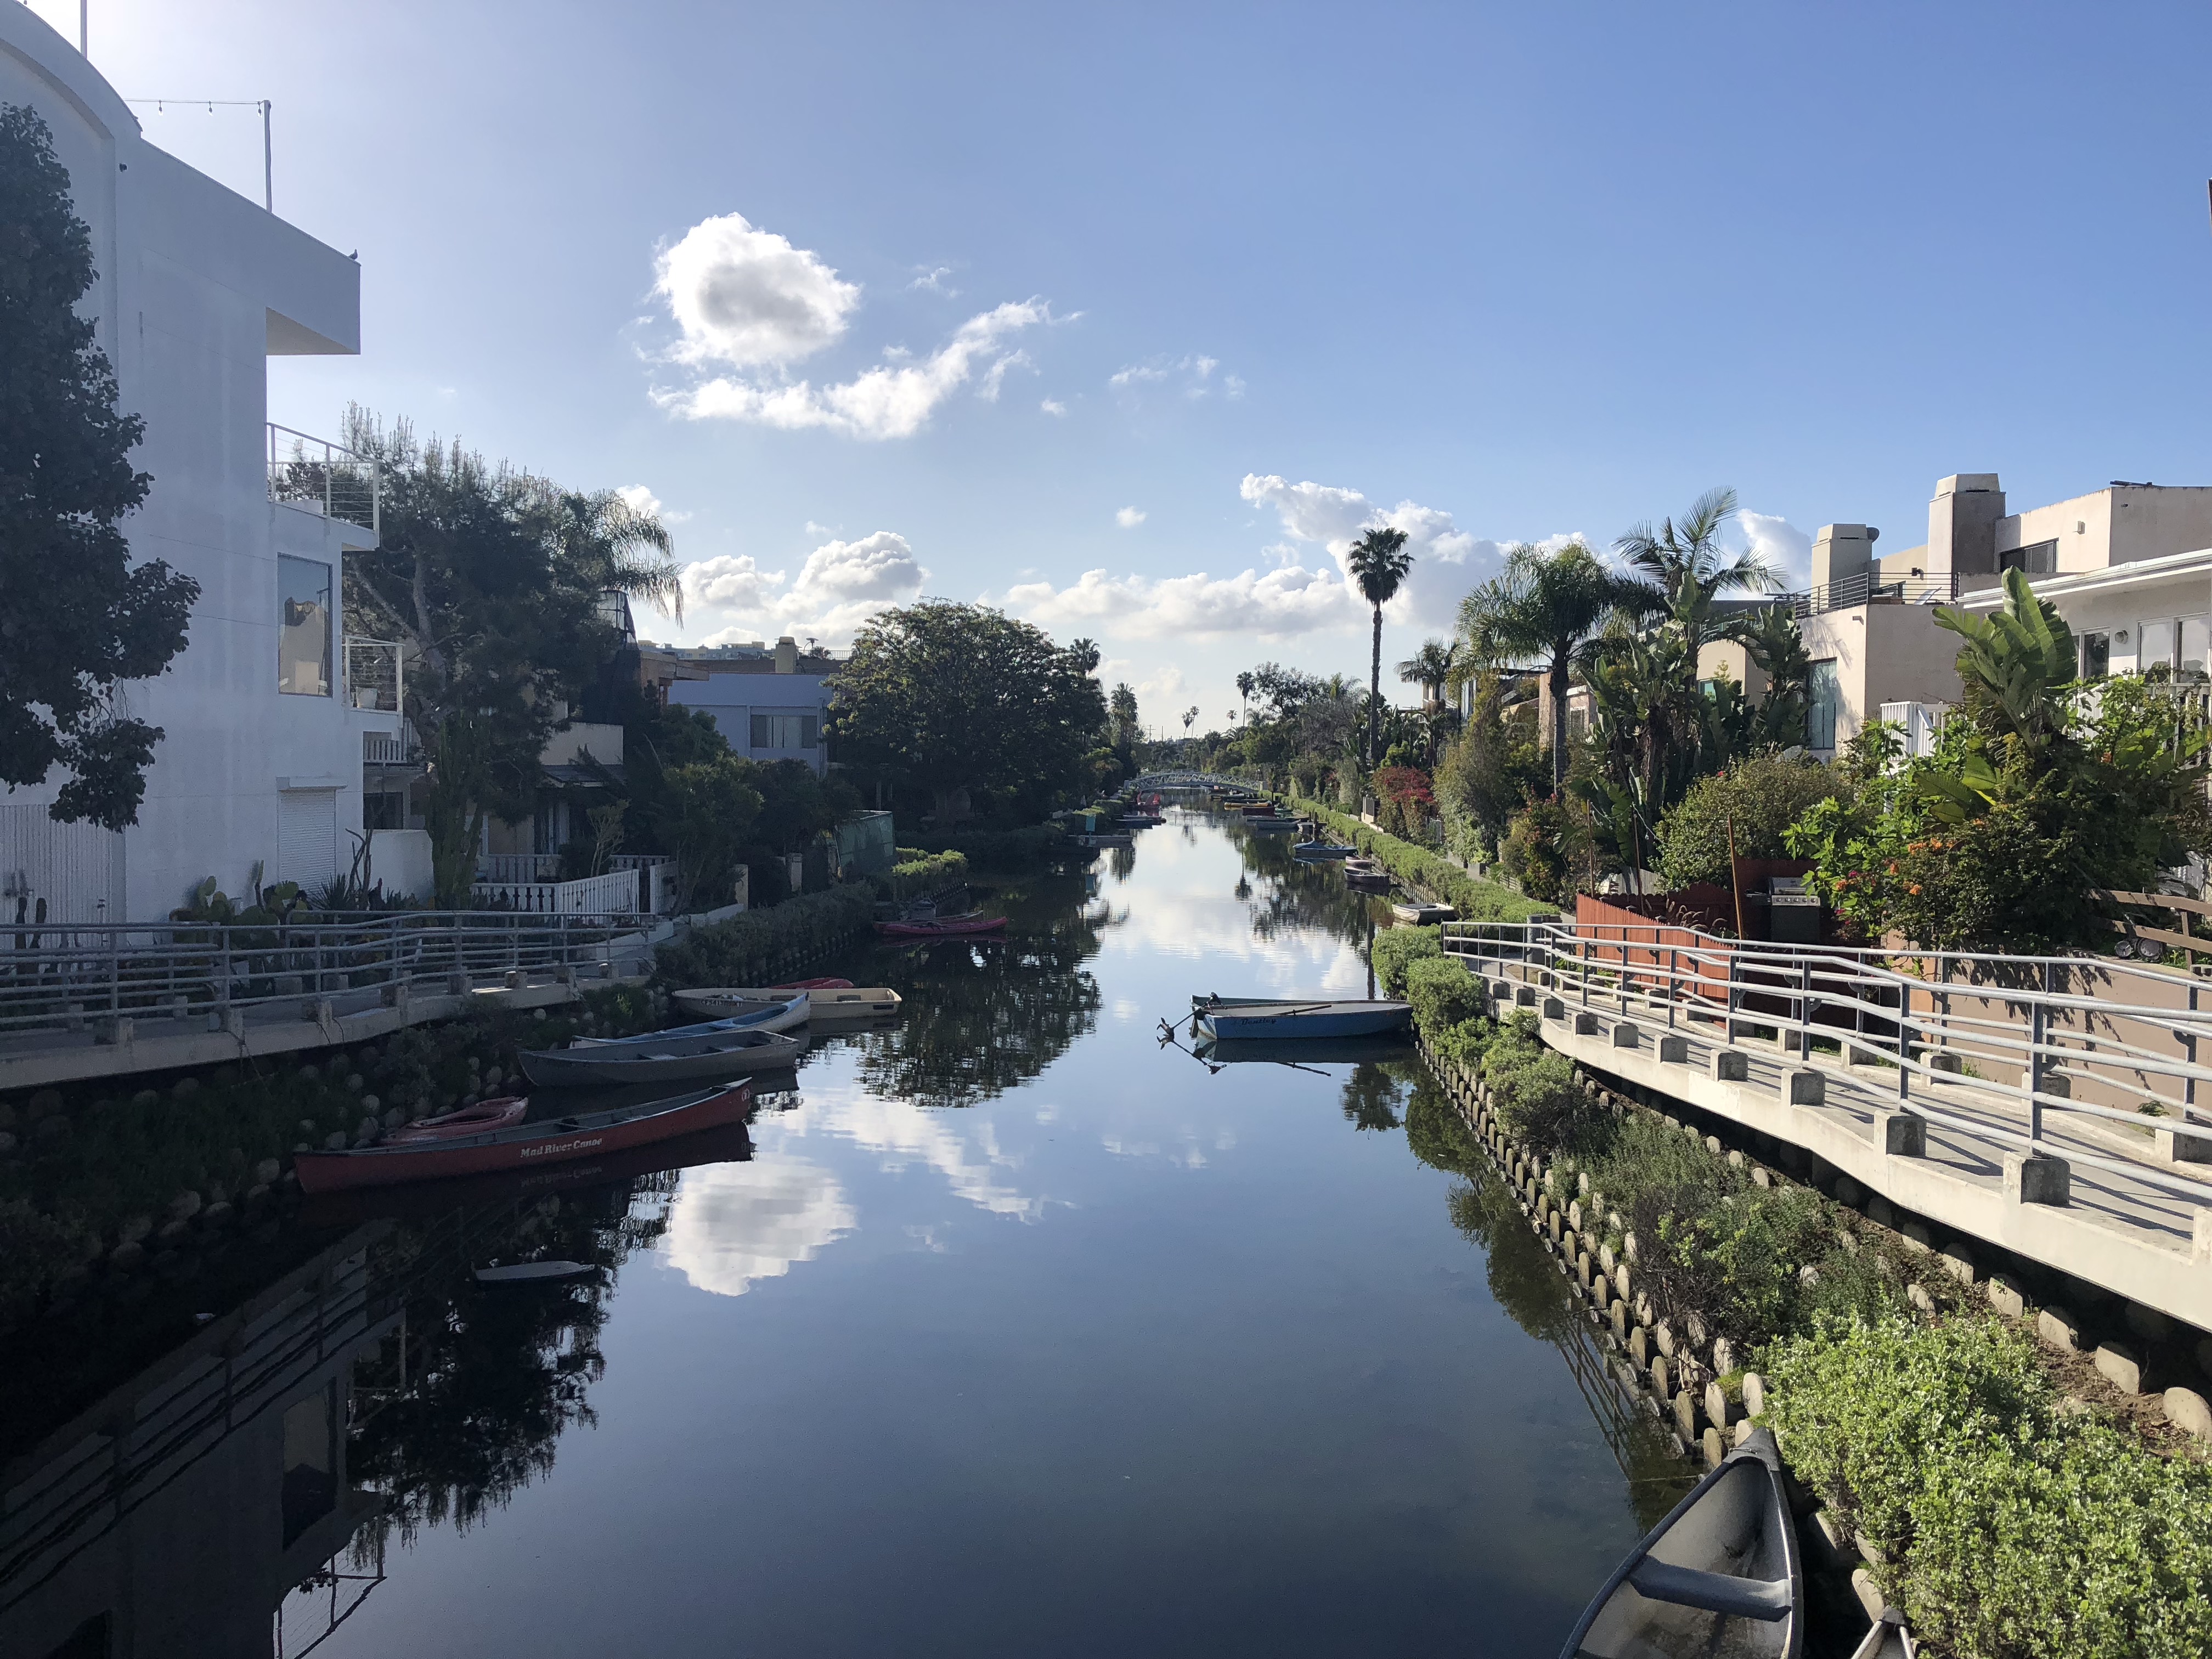 the Venice Canals